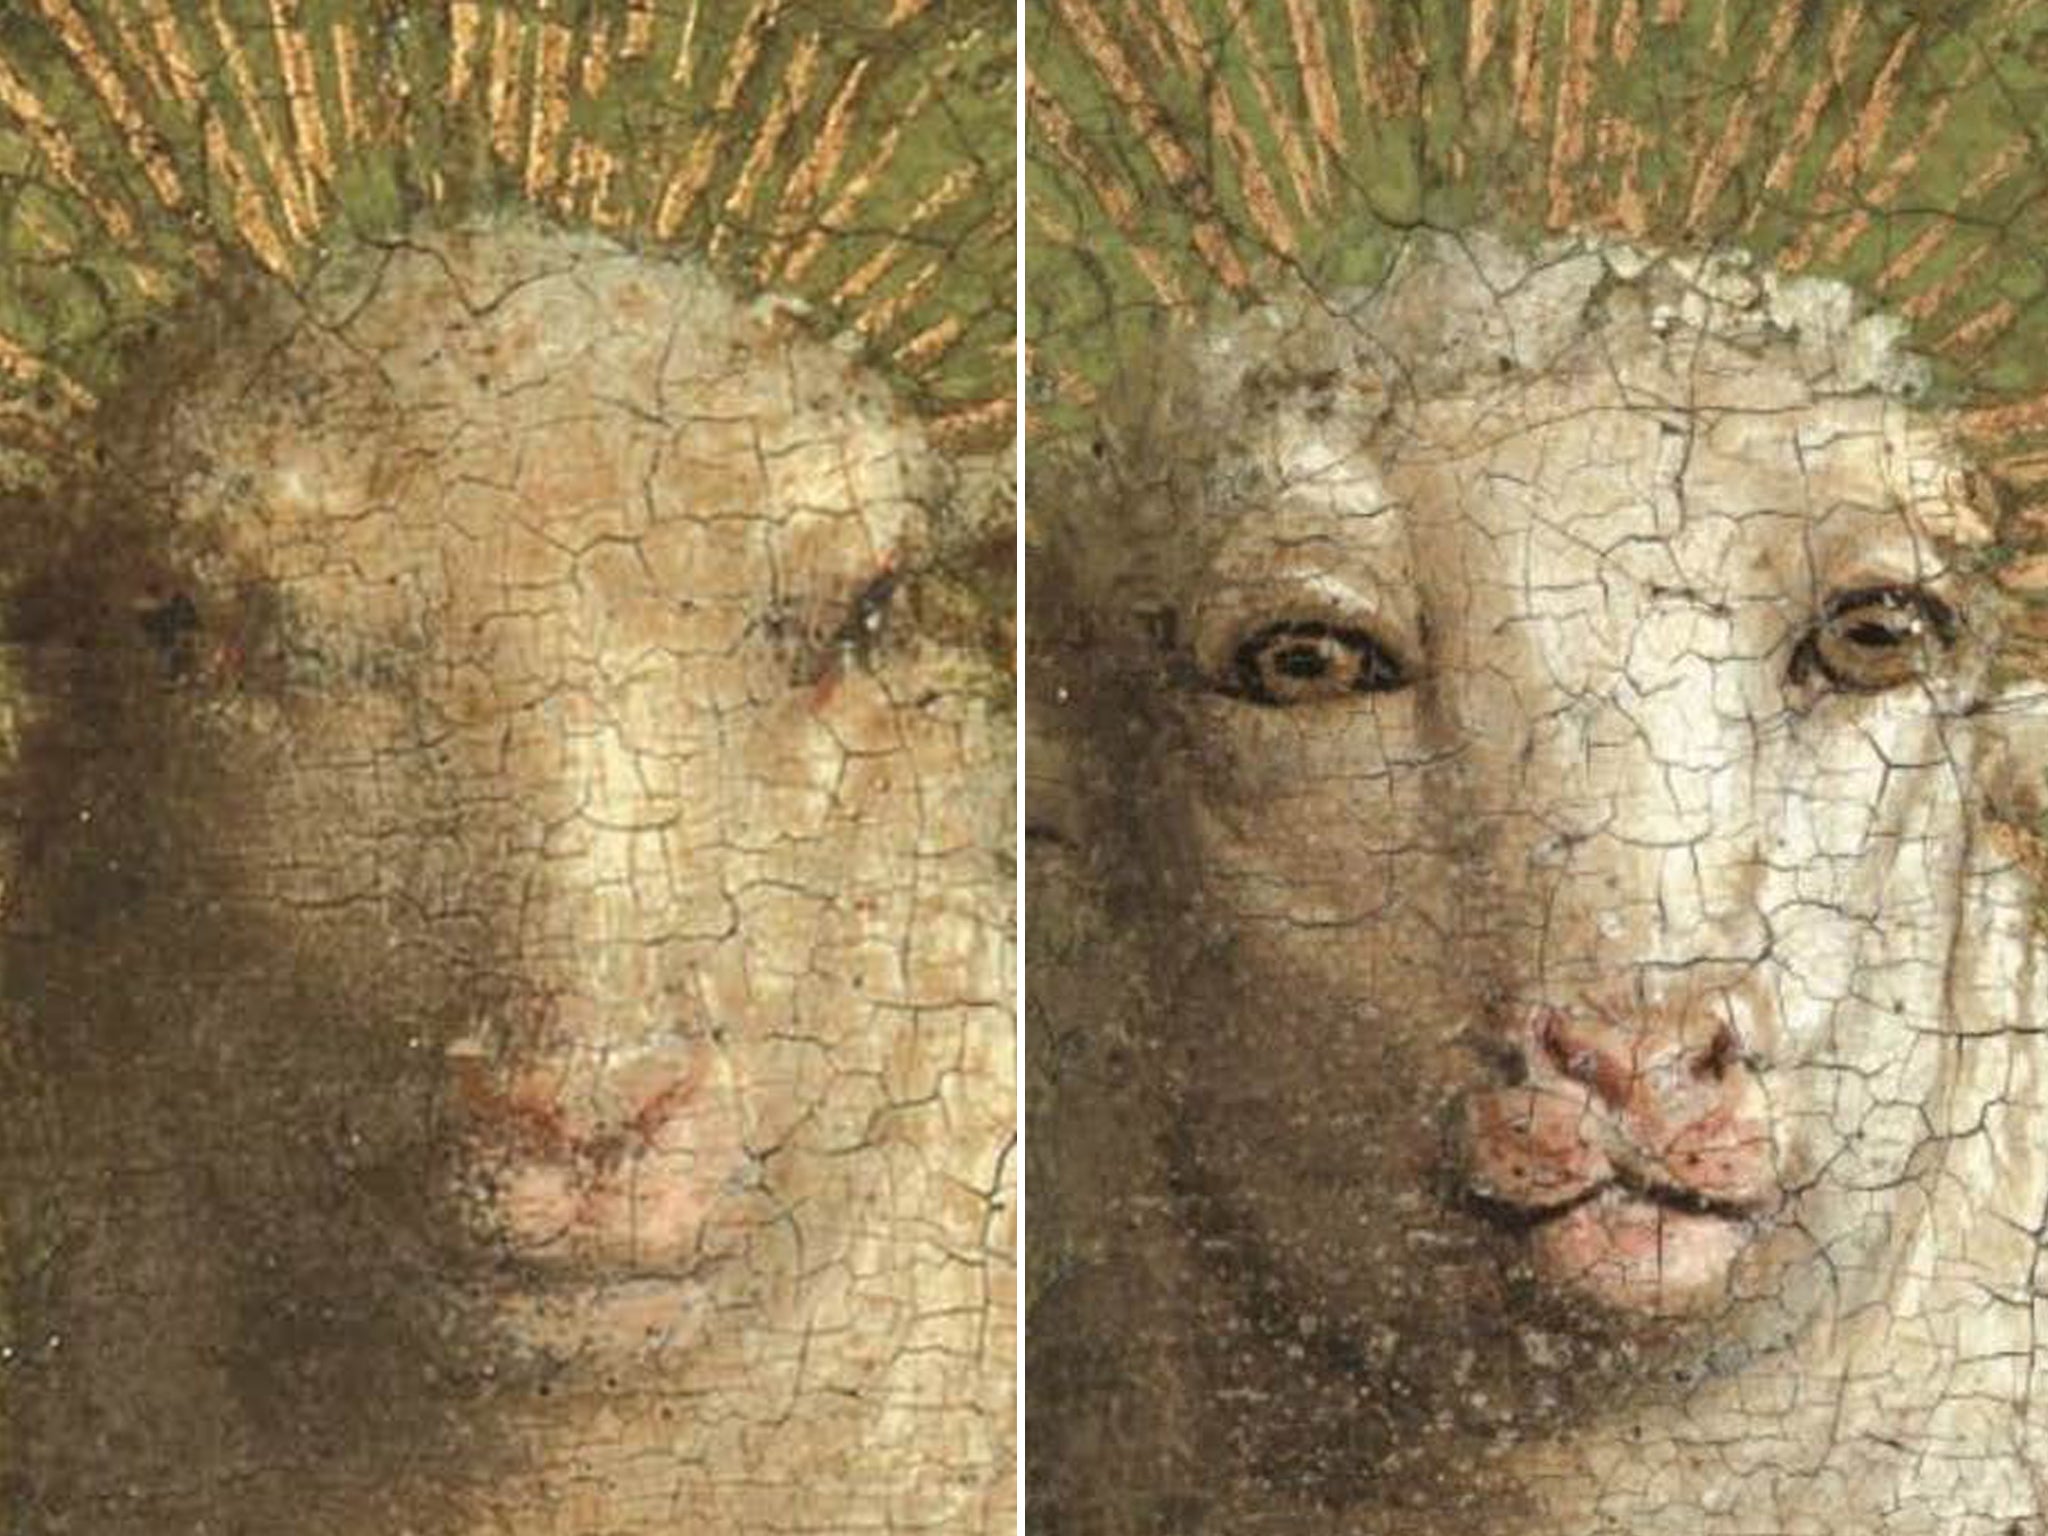 Priceless 15th century artwork restored with humanoid sheep face prompts derision and debate The Independent The Independent